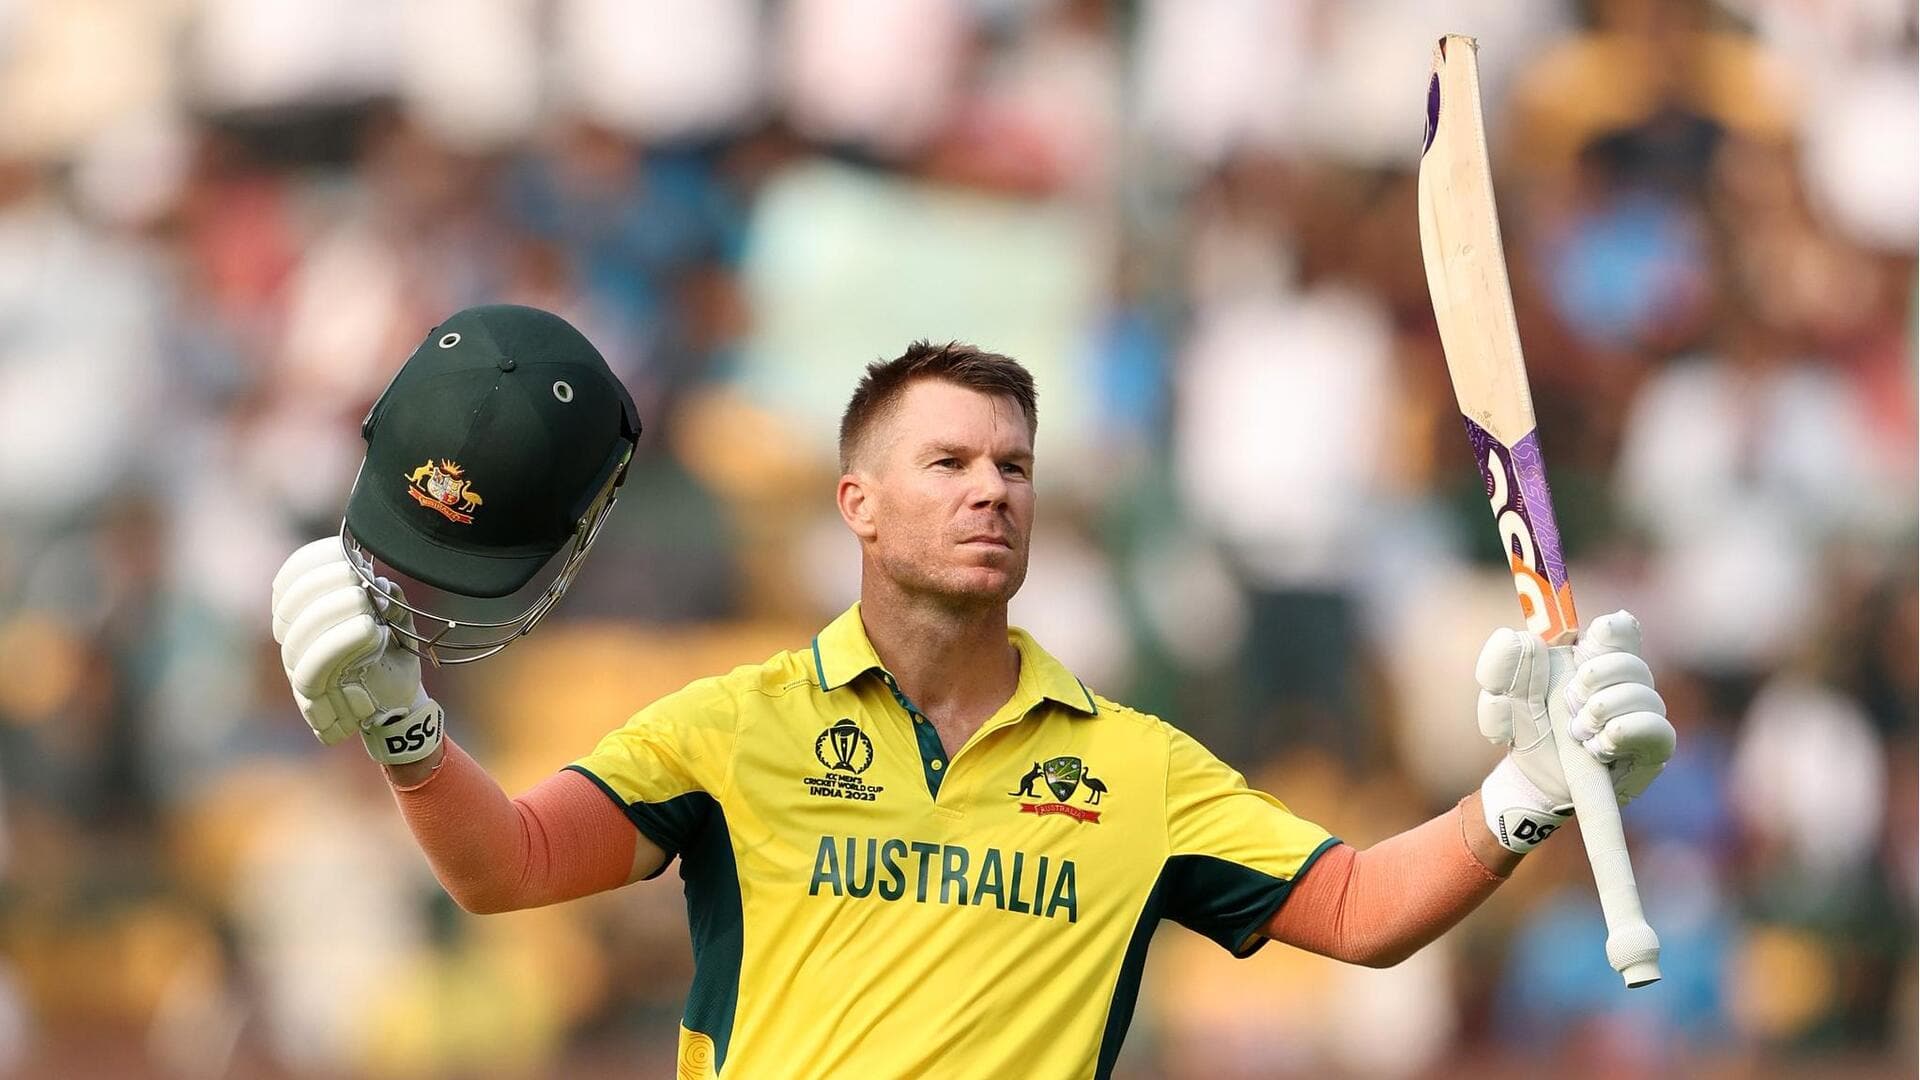 David Warner becomes highest six-hitter for Australia in World Cups